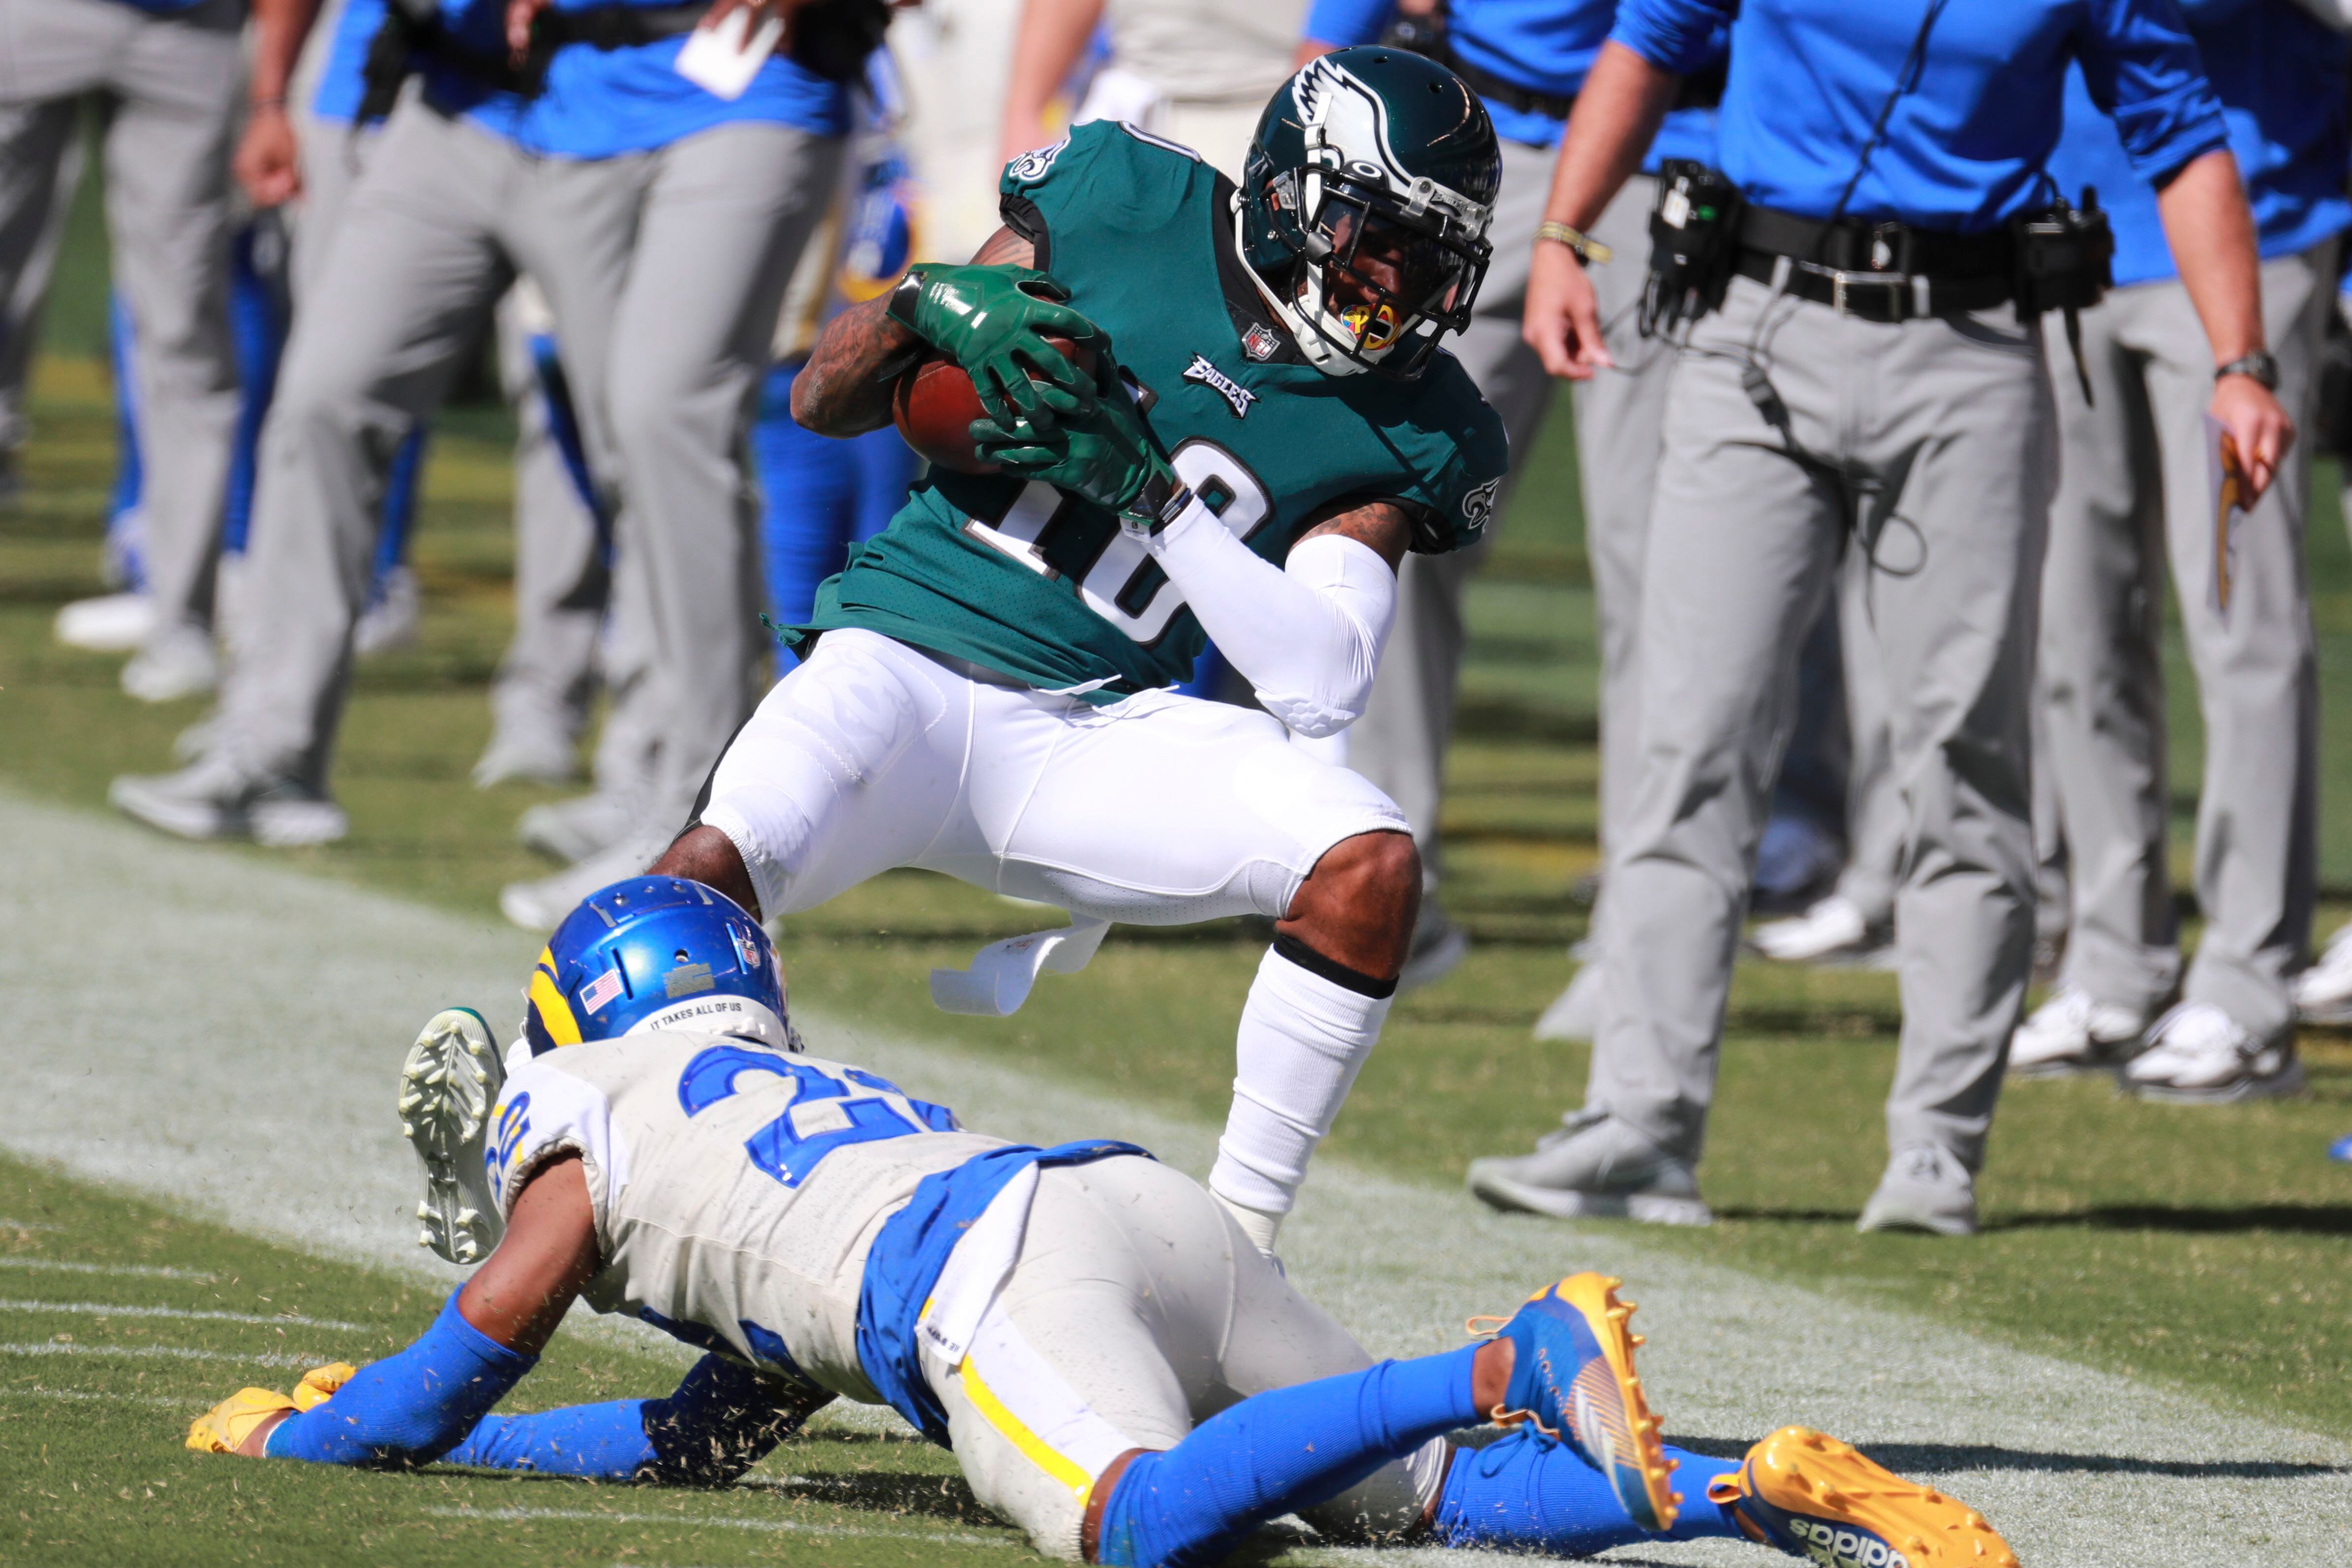 Eagles lose home opener 37-19 to Rams - WHYY